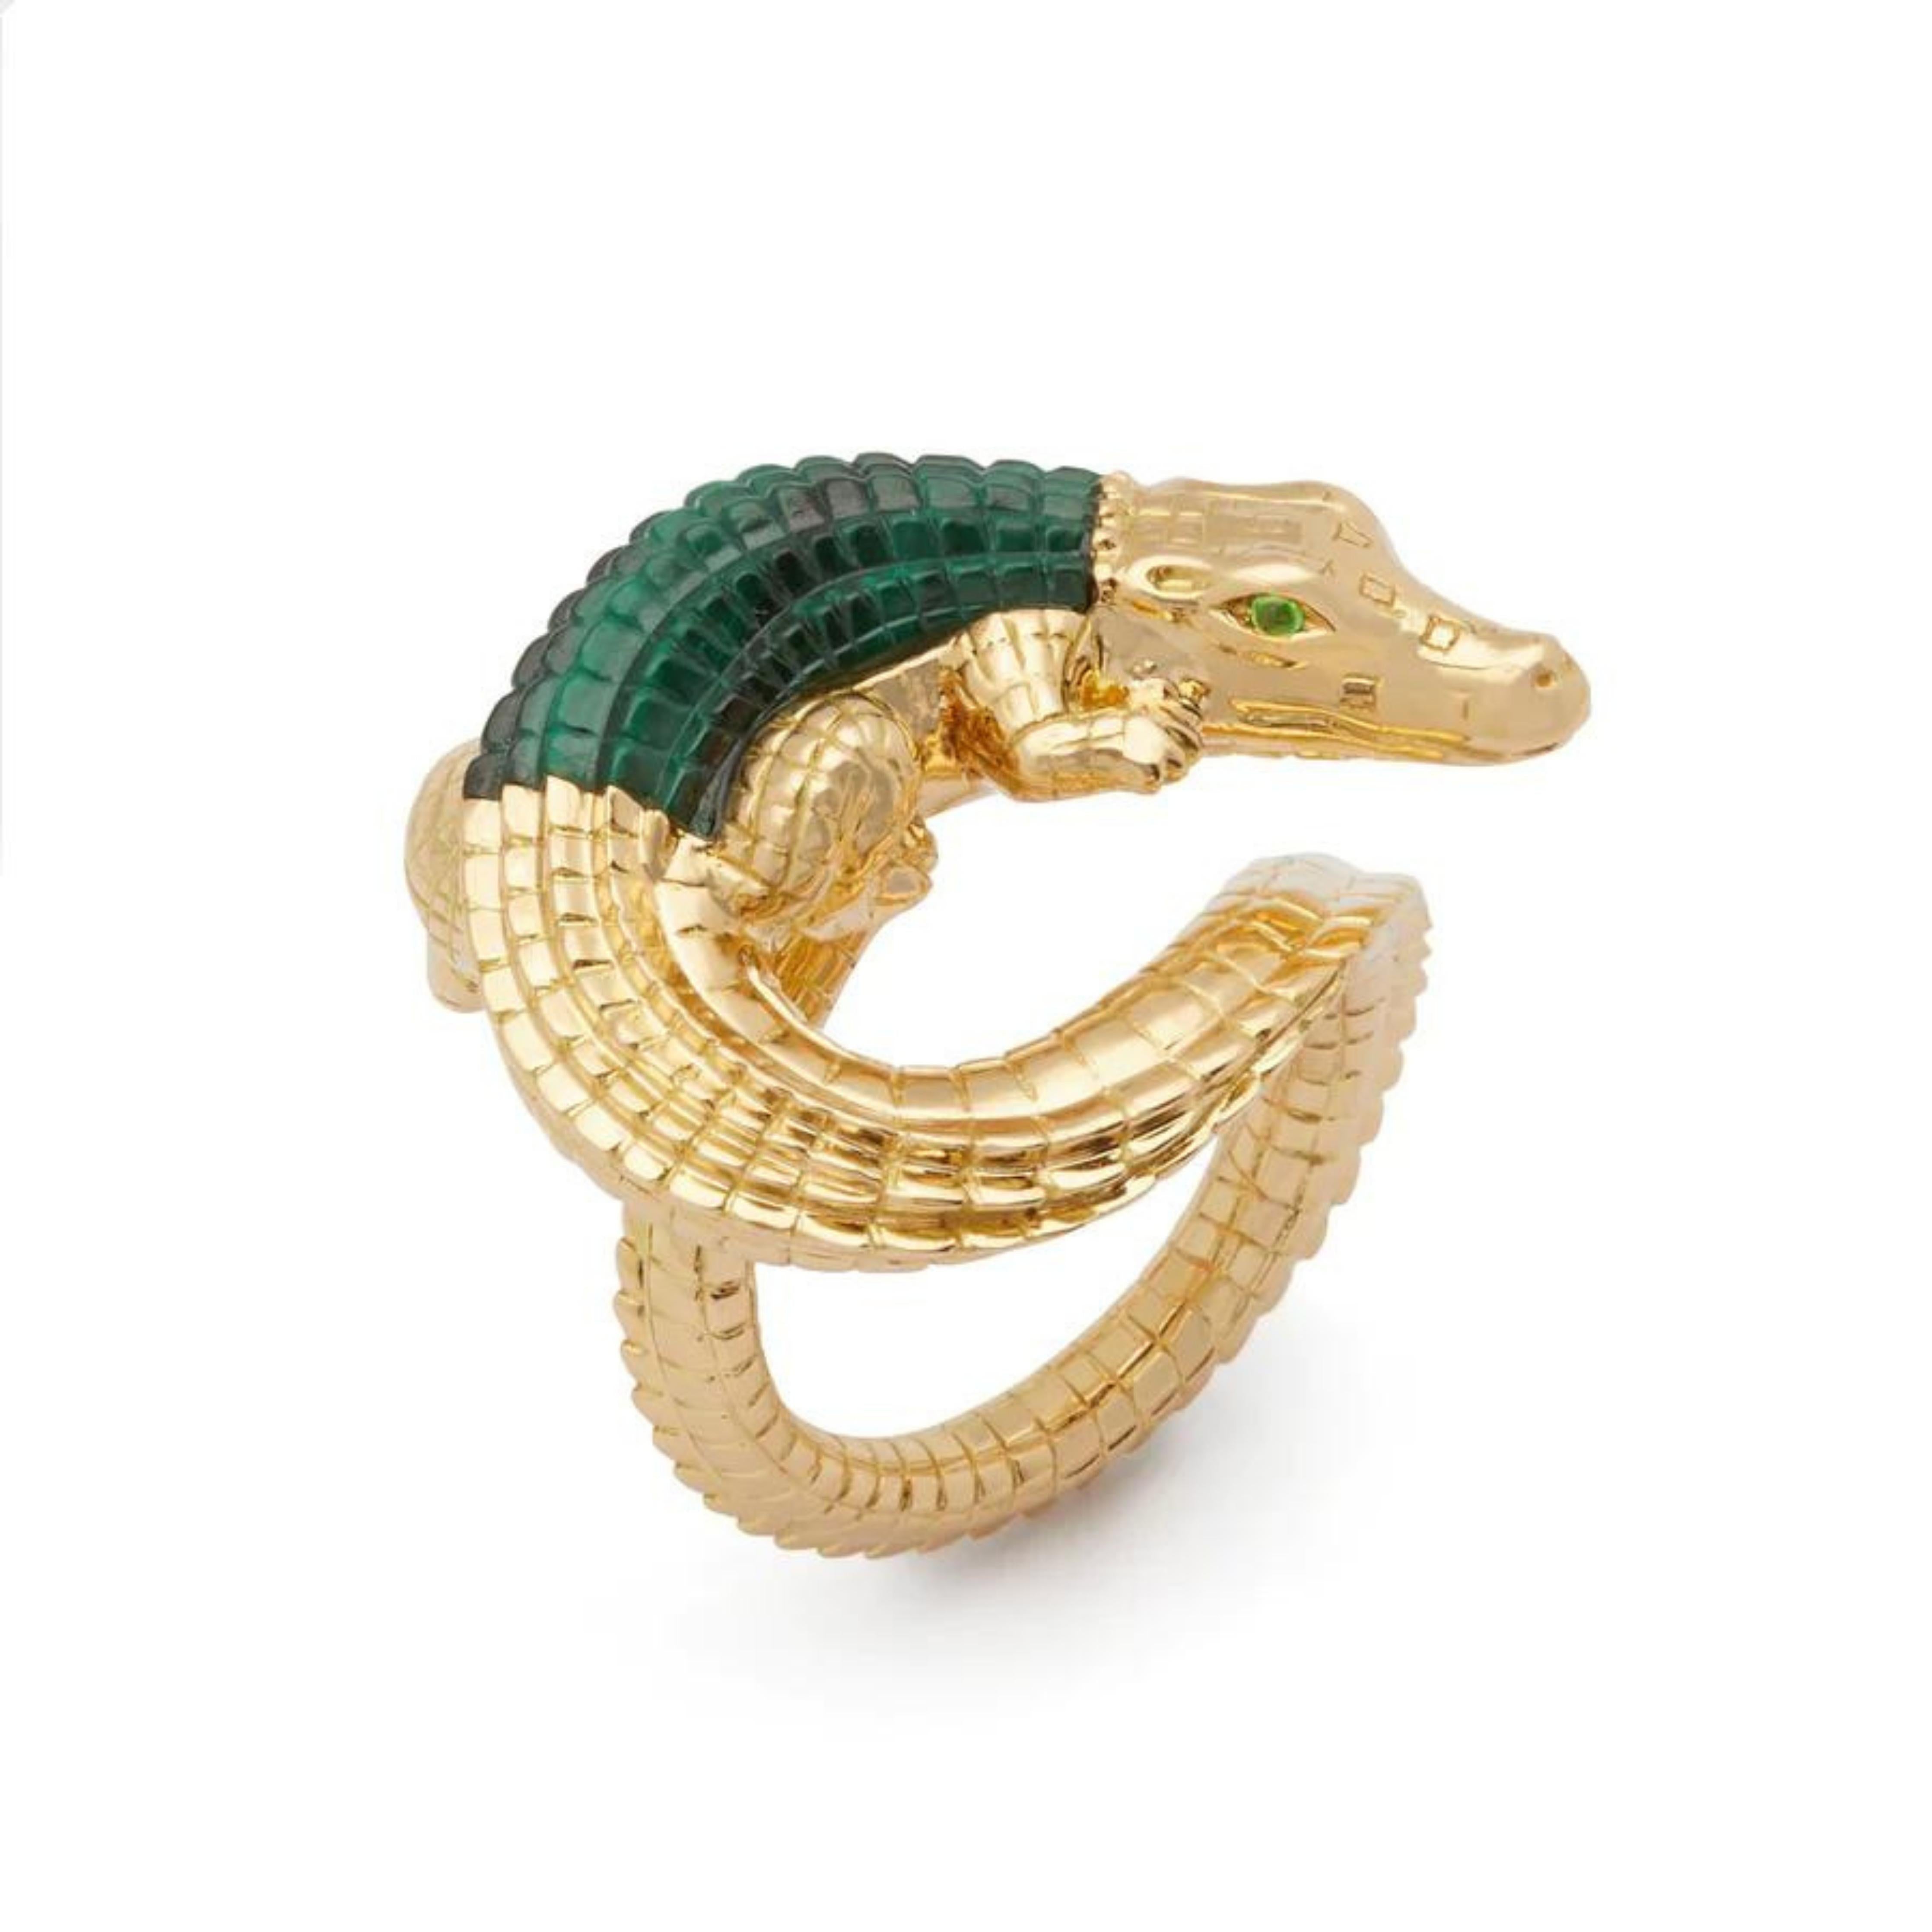 Bibi van der Velden Alligator Twist Ring in Malachite. An intricately carved ring crafted from 18K Gold with a malachite stone alligator body. The alligator is twisted from tail to nose and the ring is set beneath the scultpure. Photo shown from the side view.